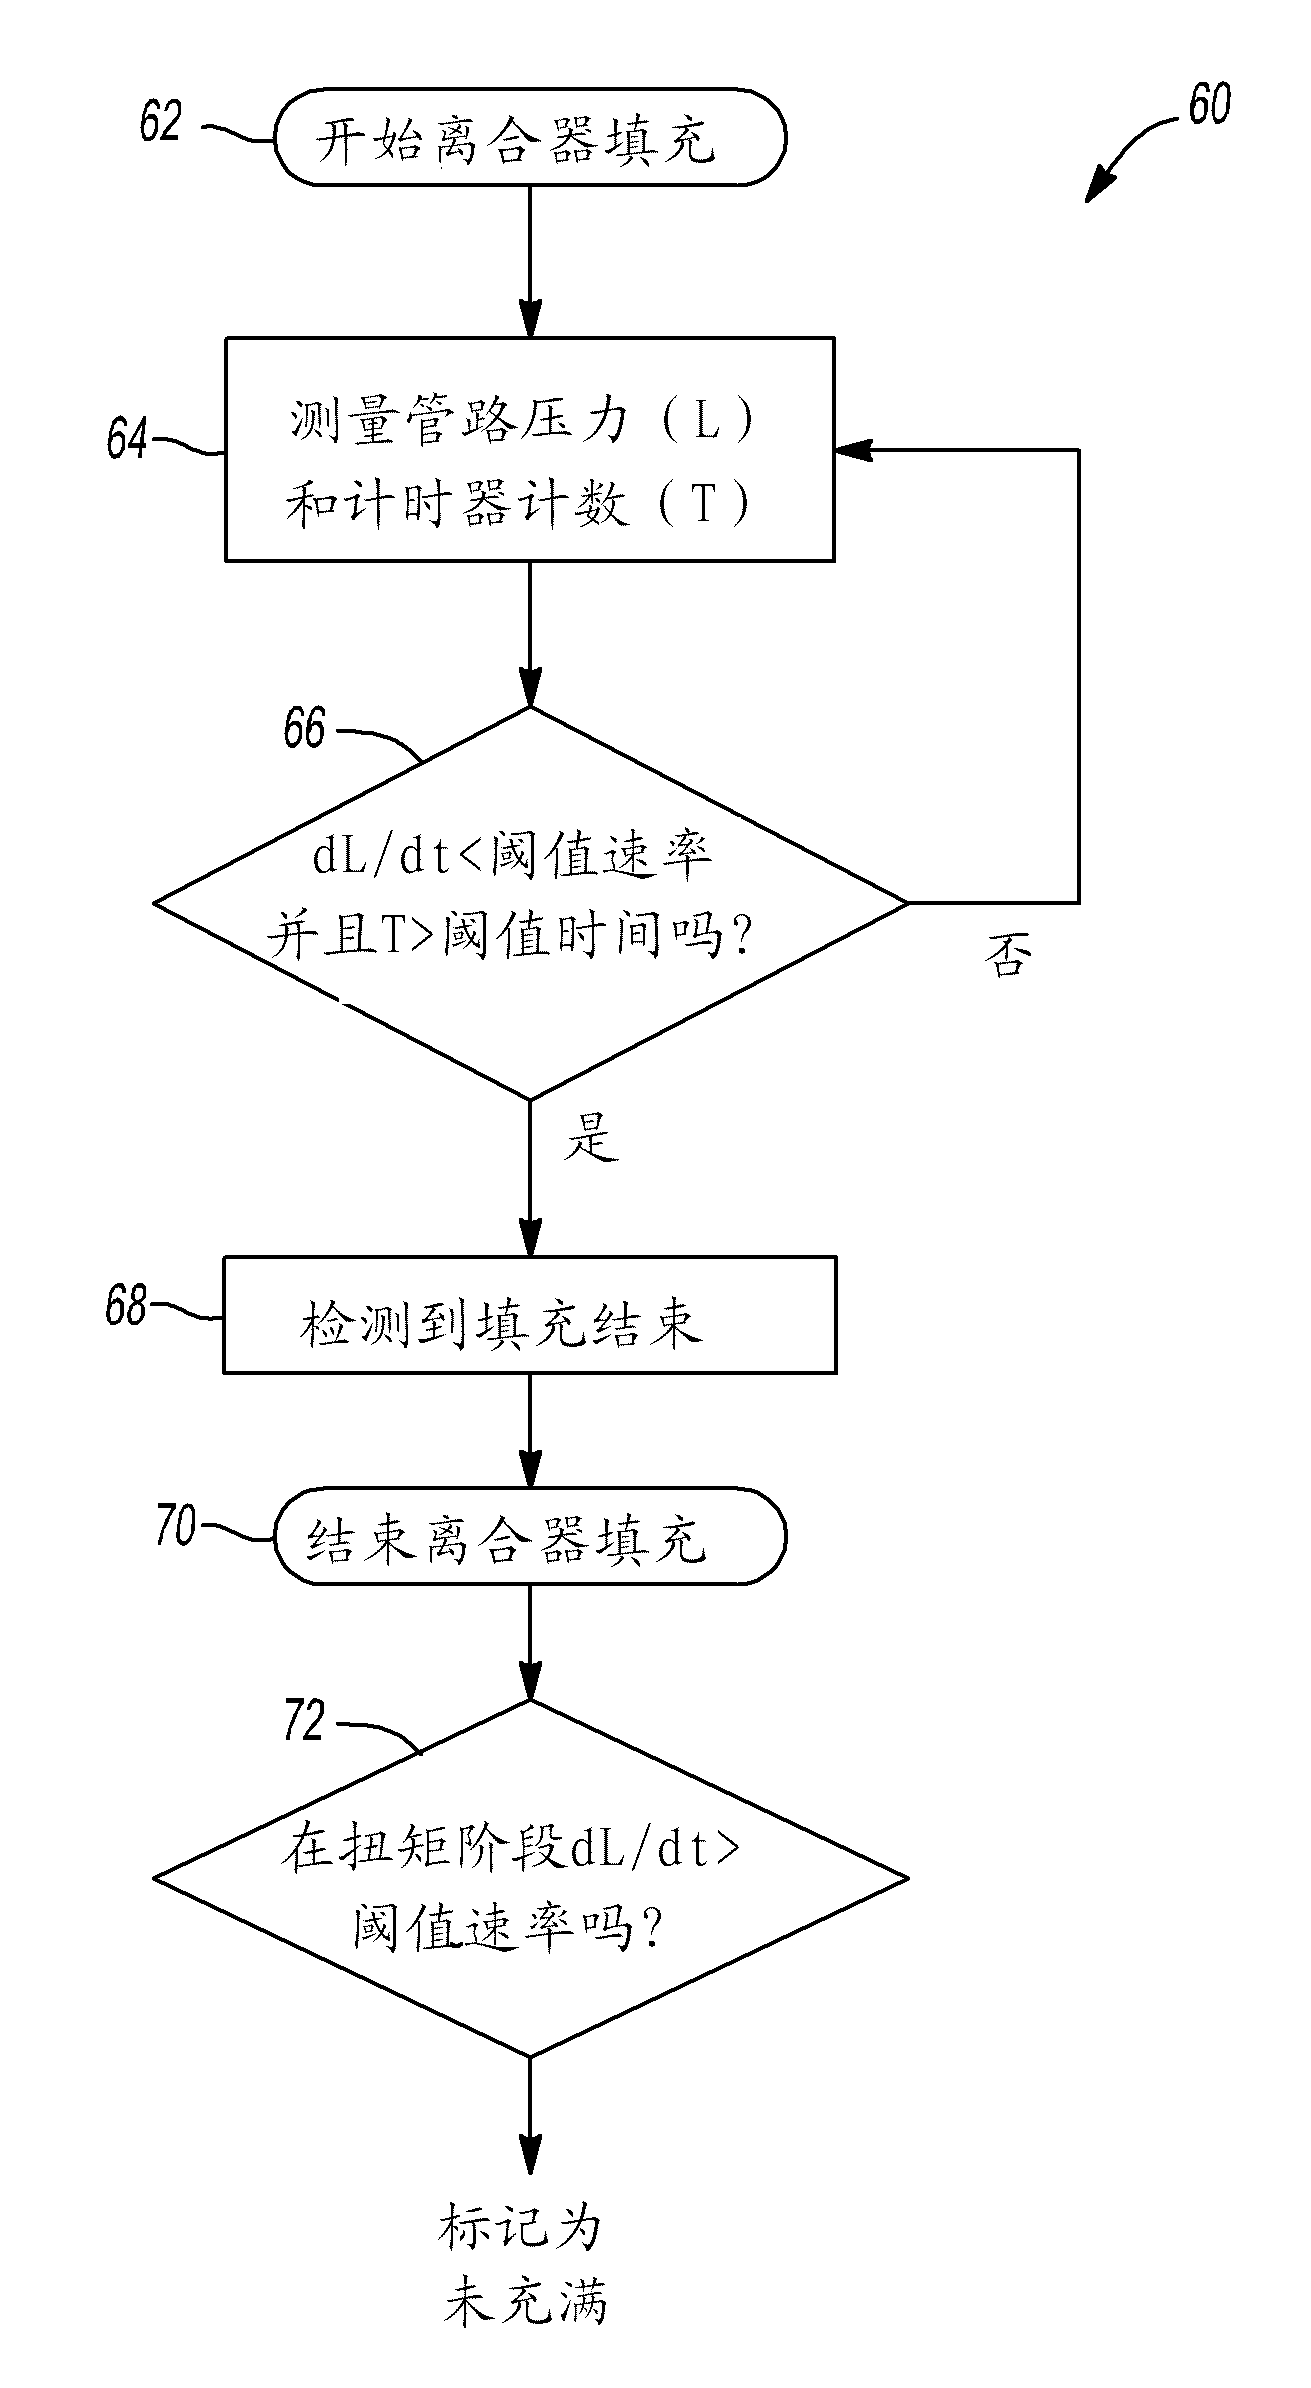 Method of detecting filling of hydraulic clutch